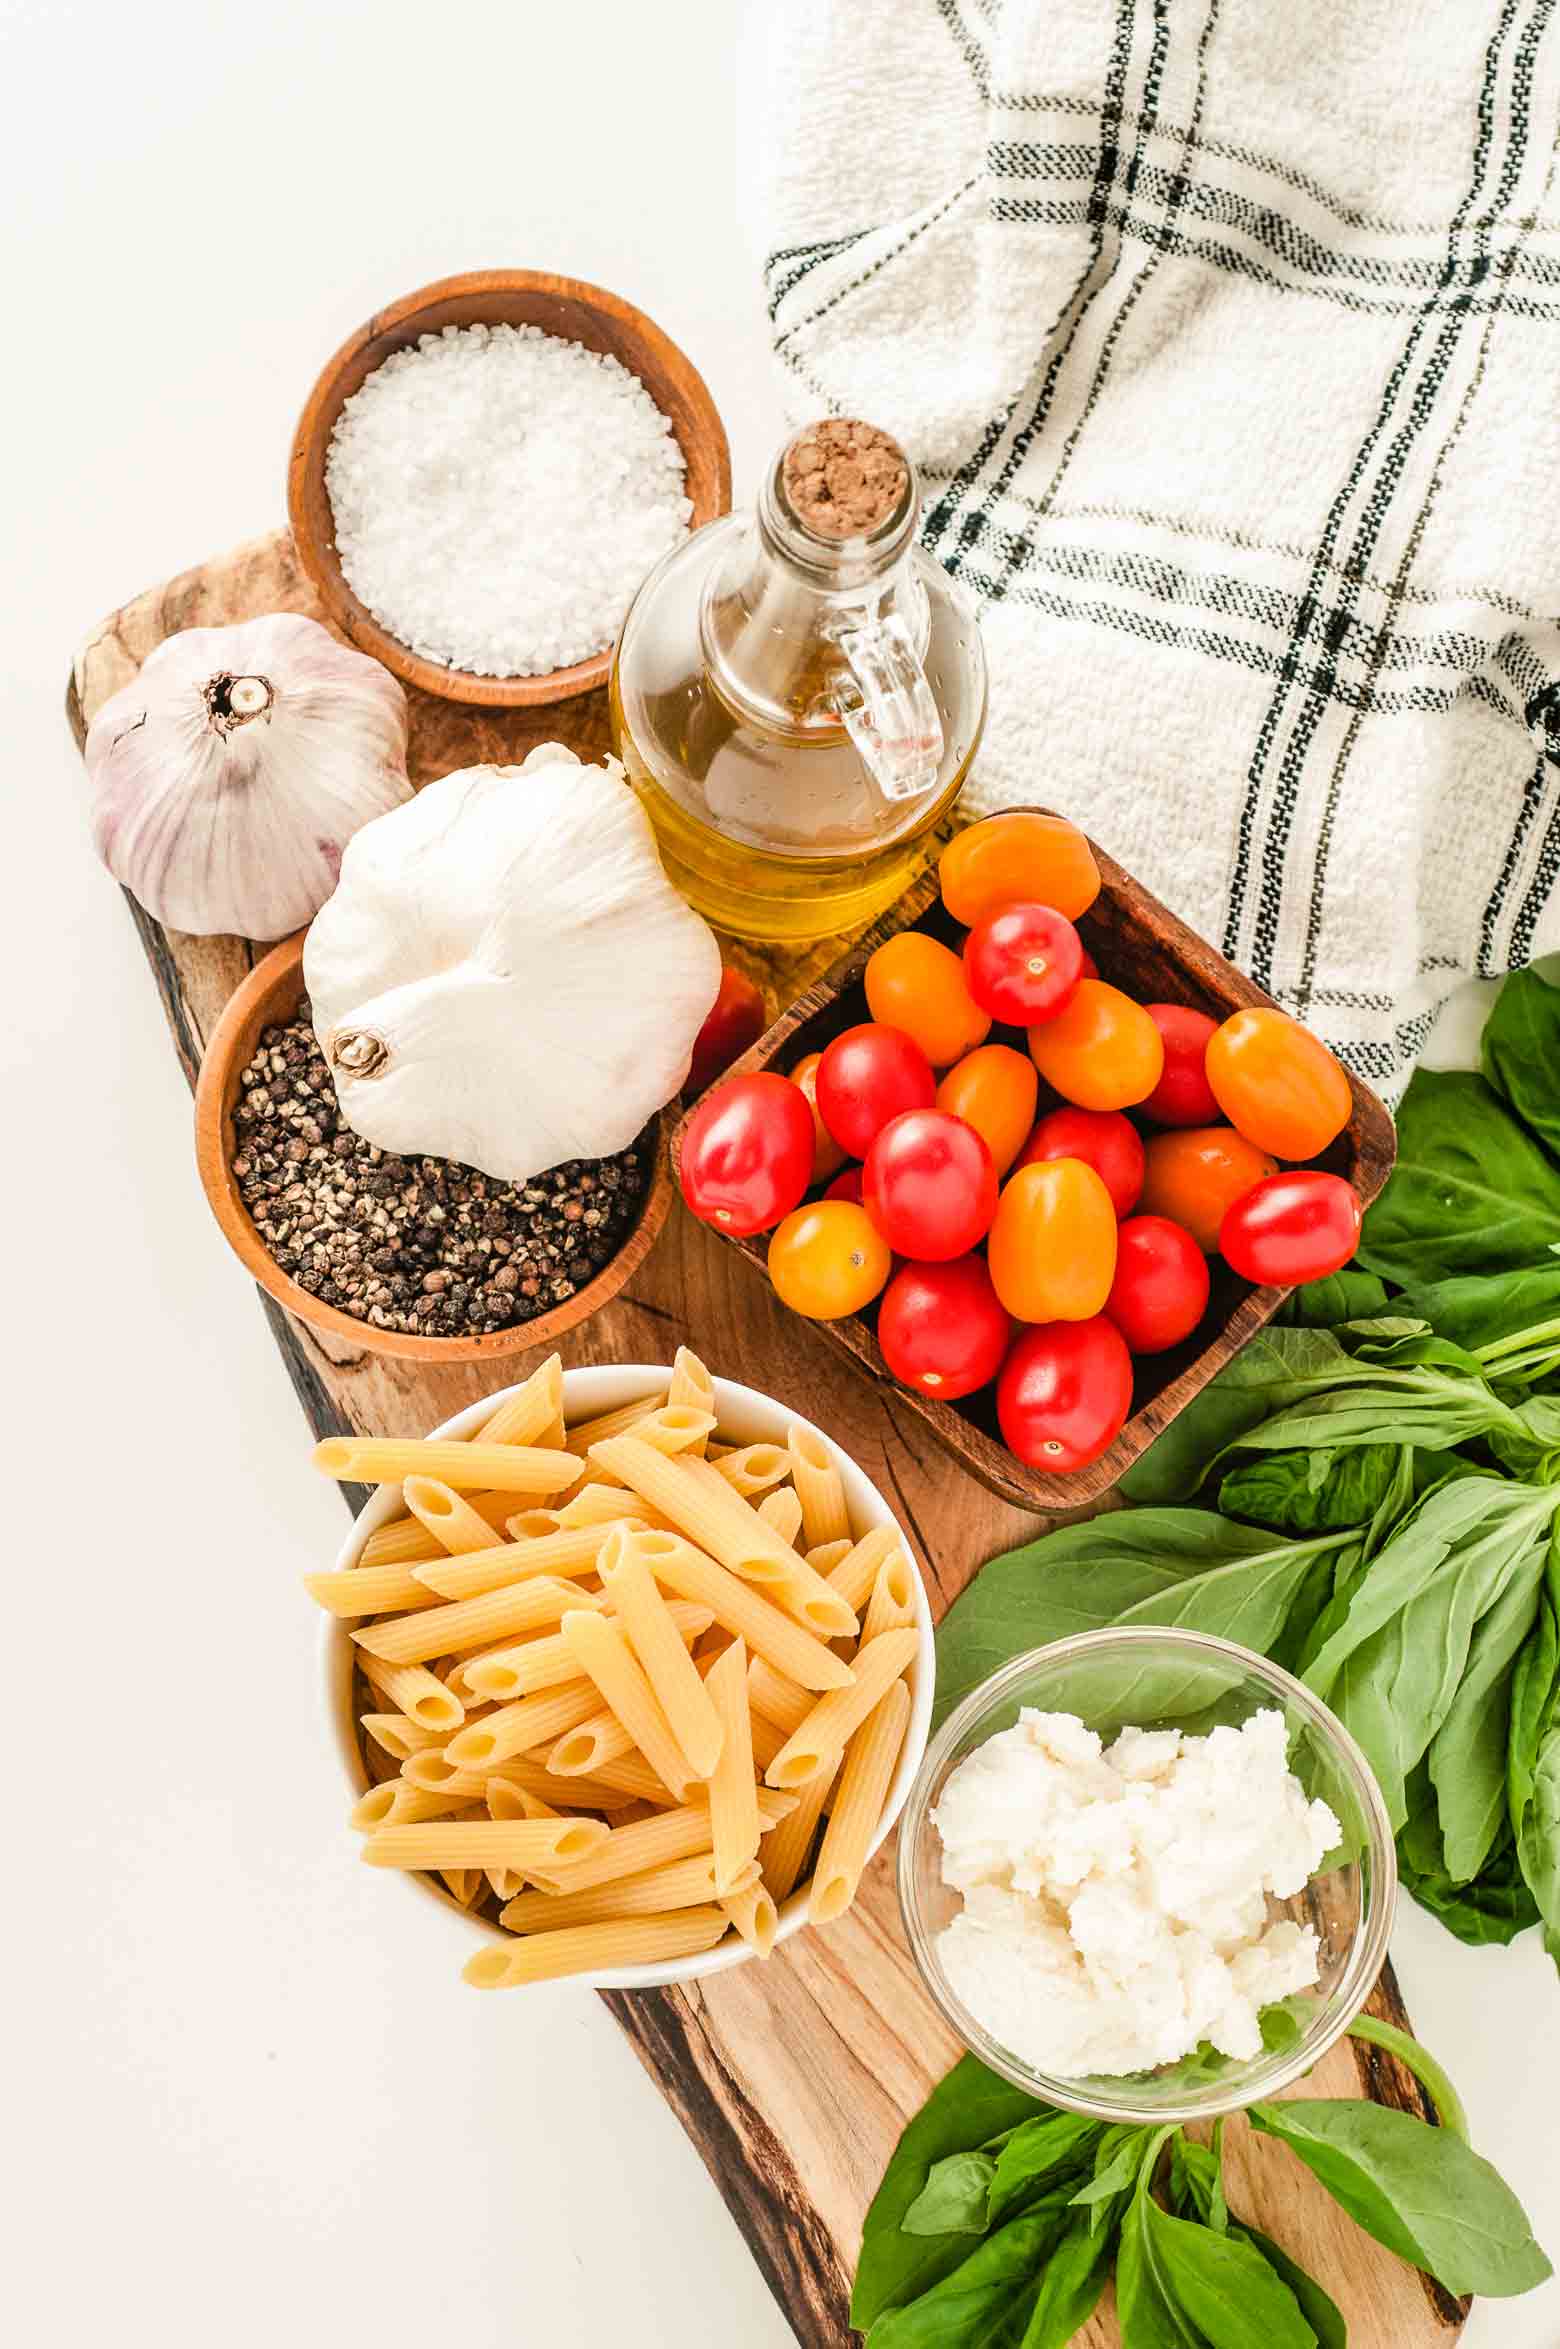 ingredients needed for a basic tomato basil sauce include garlic, salt, pepper, olive oil, noodles, tomatoes, basil and ricotta